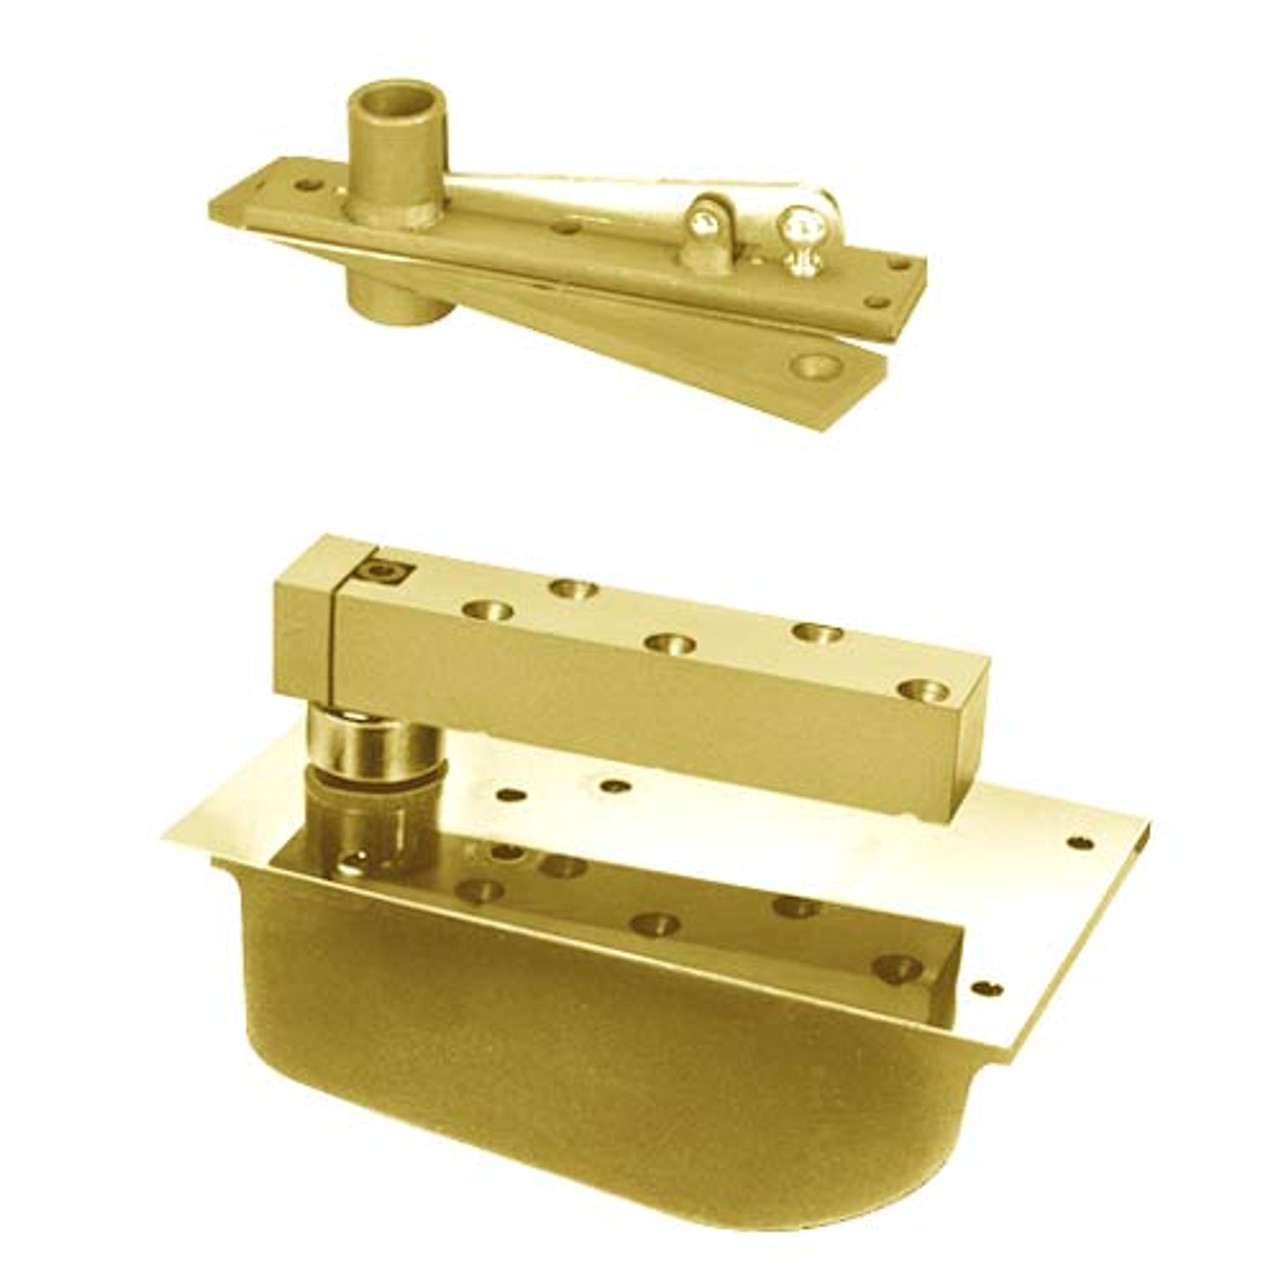 H28-90N-LTP-LH-605 Rixson 28 Series Heavy Duty Single Acting Center Hung Floor Closer in Bright Brass Finish